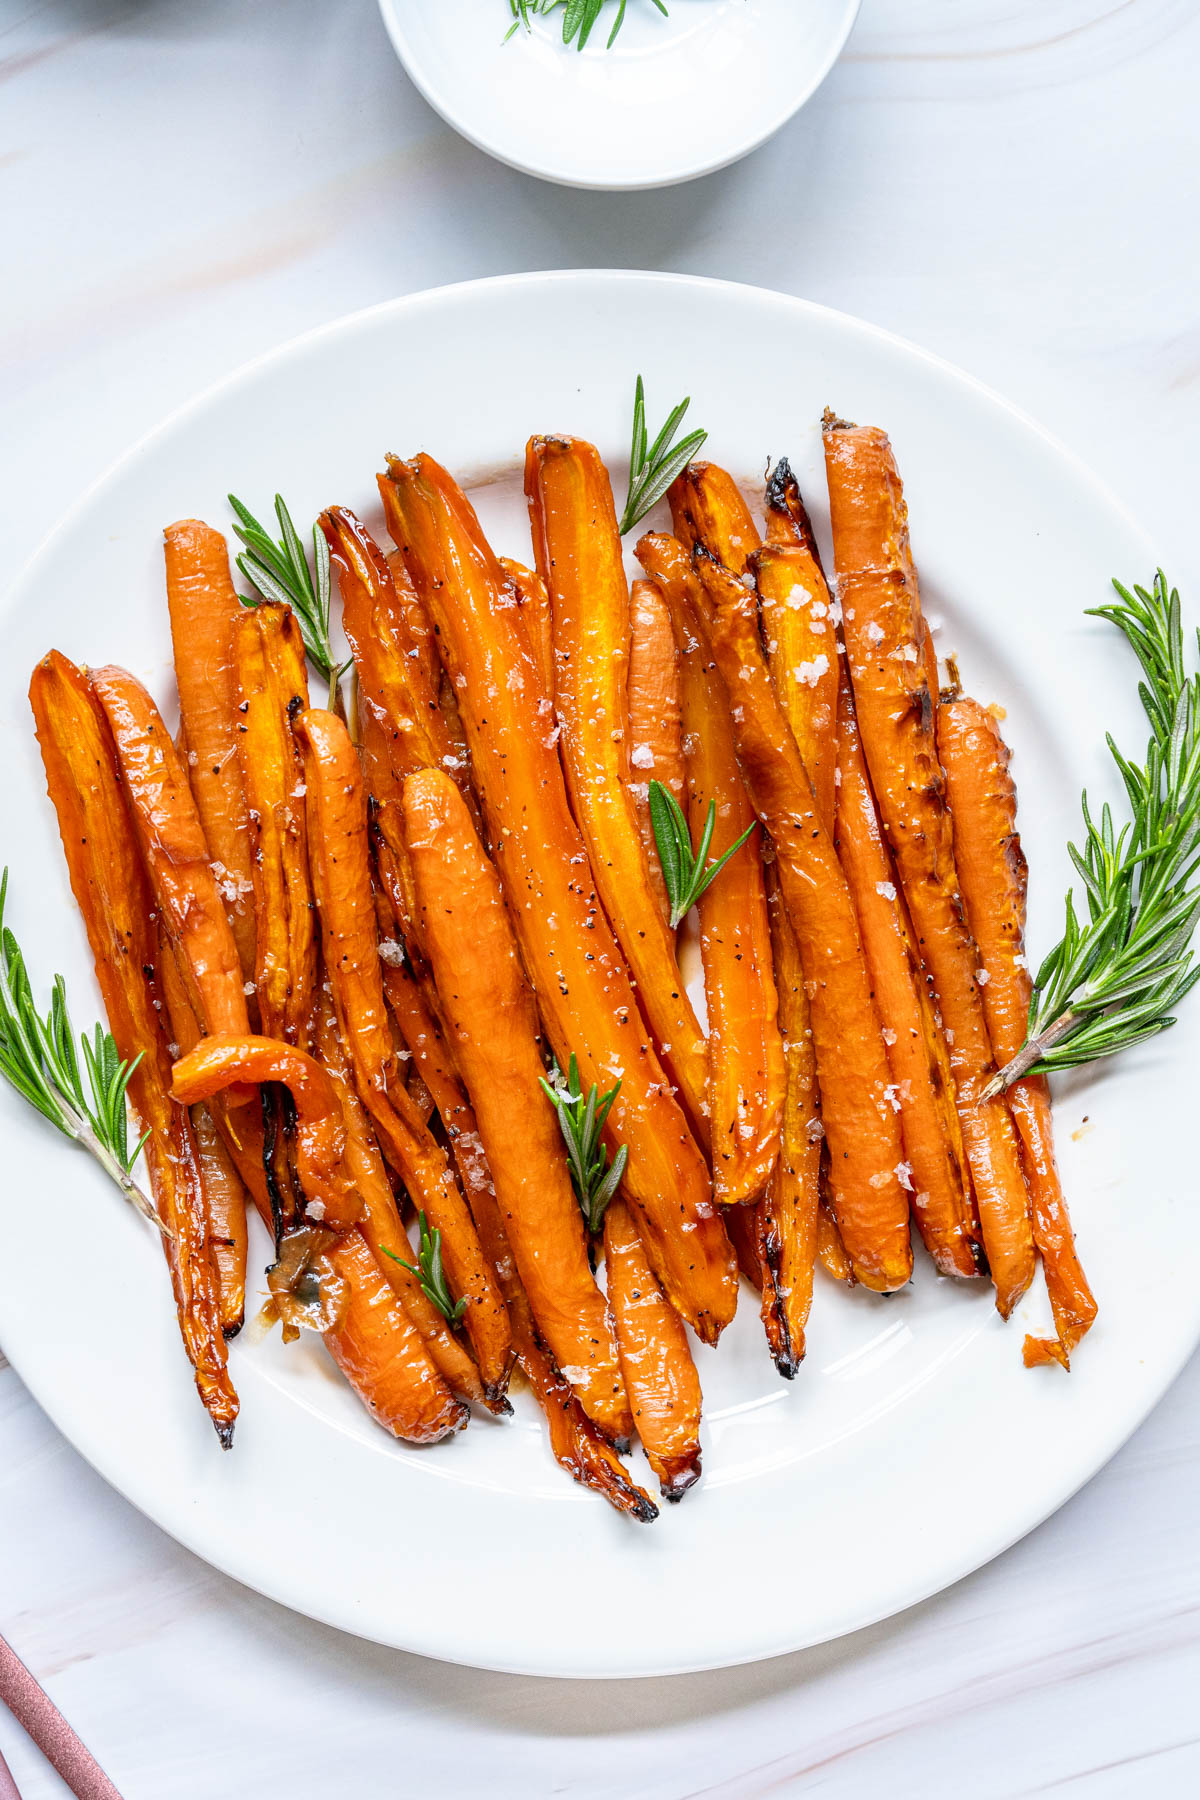 Roasted carrots on a white plate with rosemary sprigs.